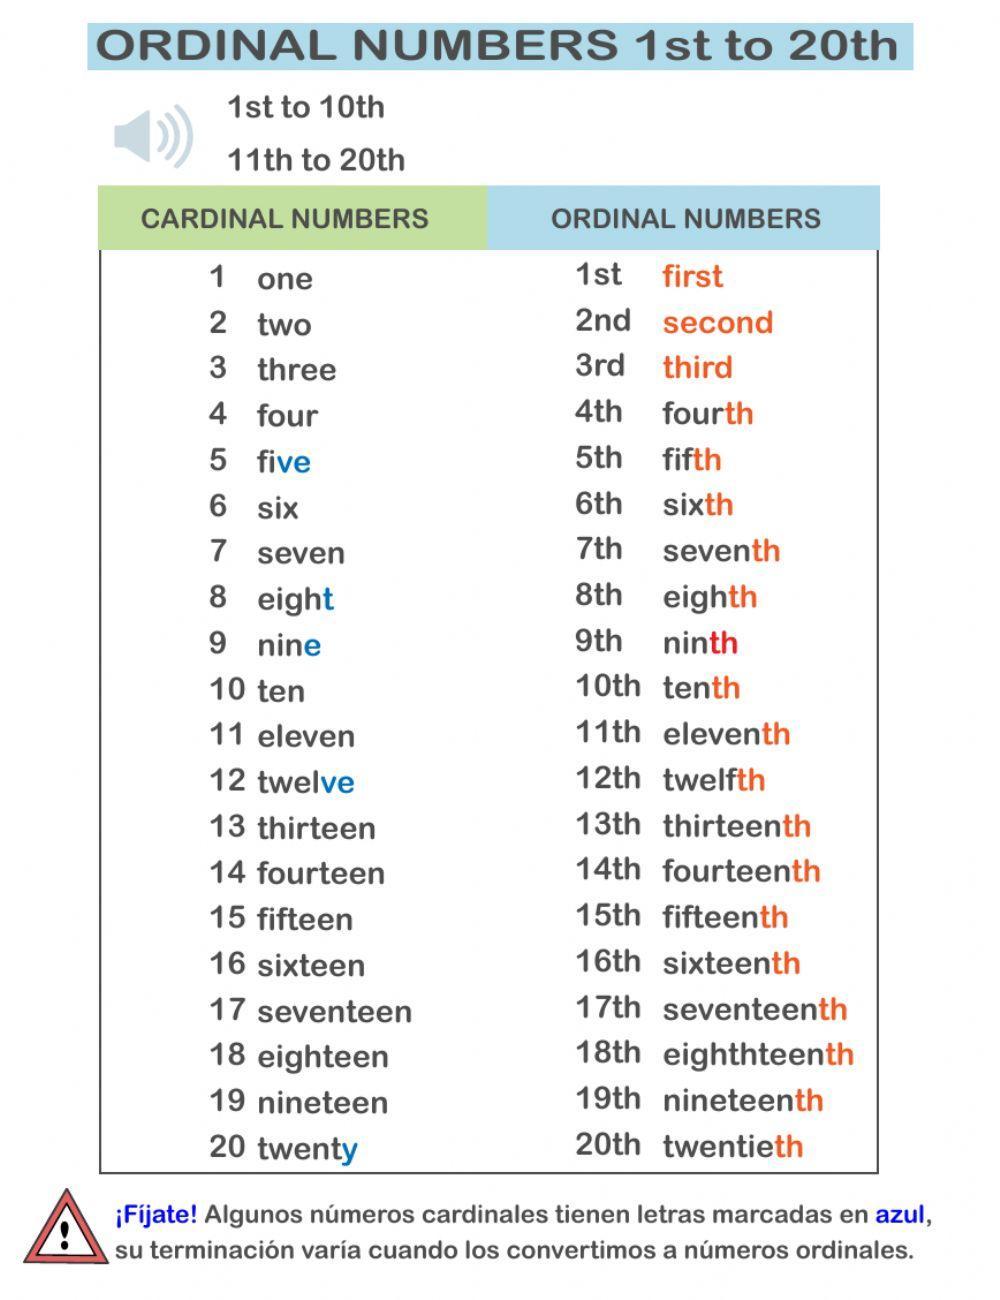 Ordinal numbers 1 to 20